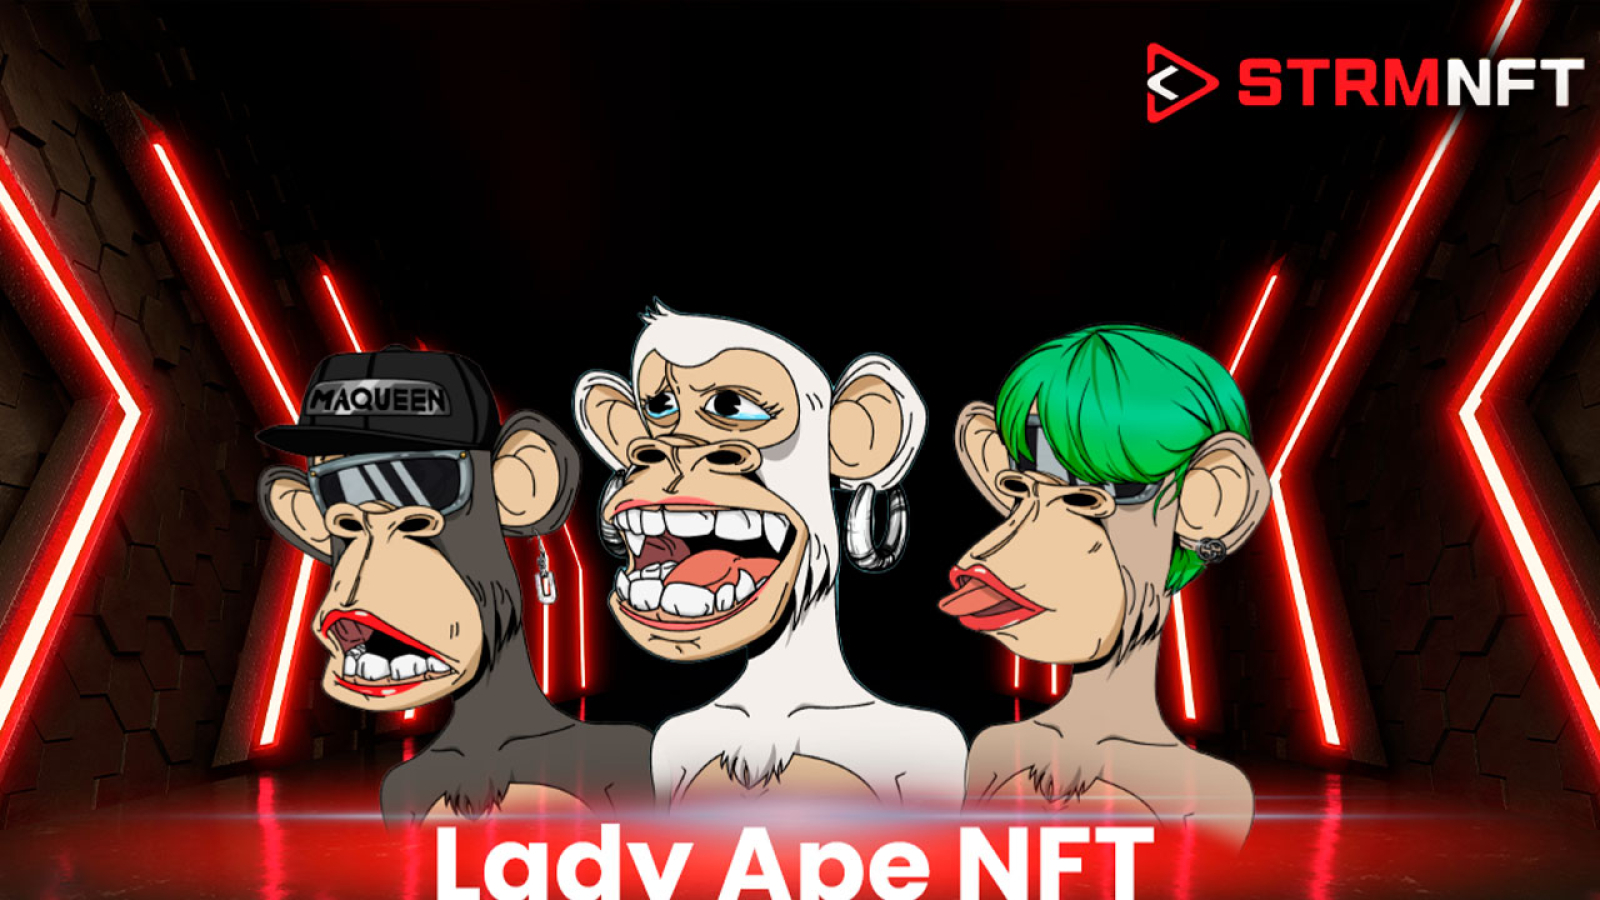 Lady Ape NFT Pre-booking Extended Until July 16 on STRMNFT Marketplace